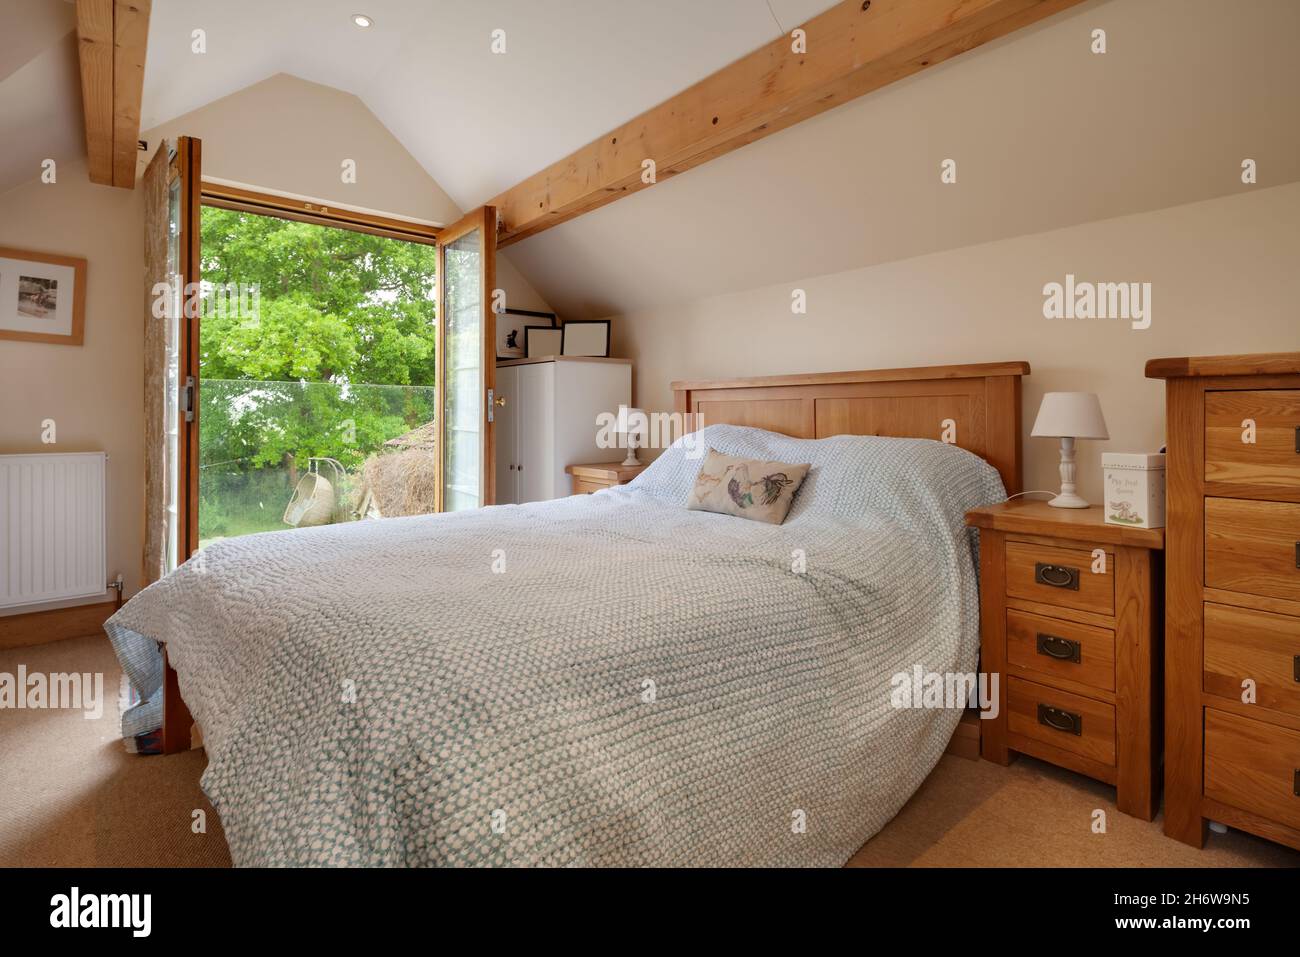 Pine Bedroom Furniture High Resolution Stock Photography and ...